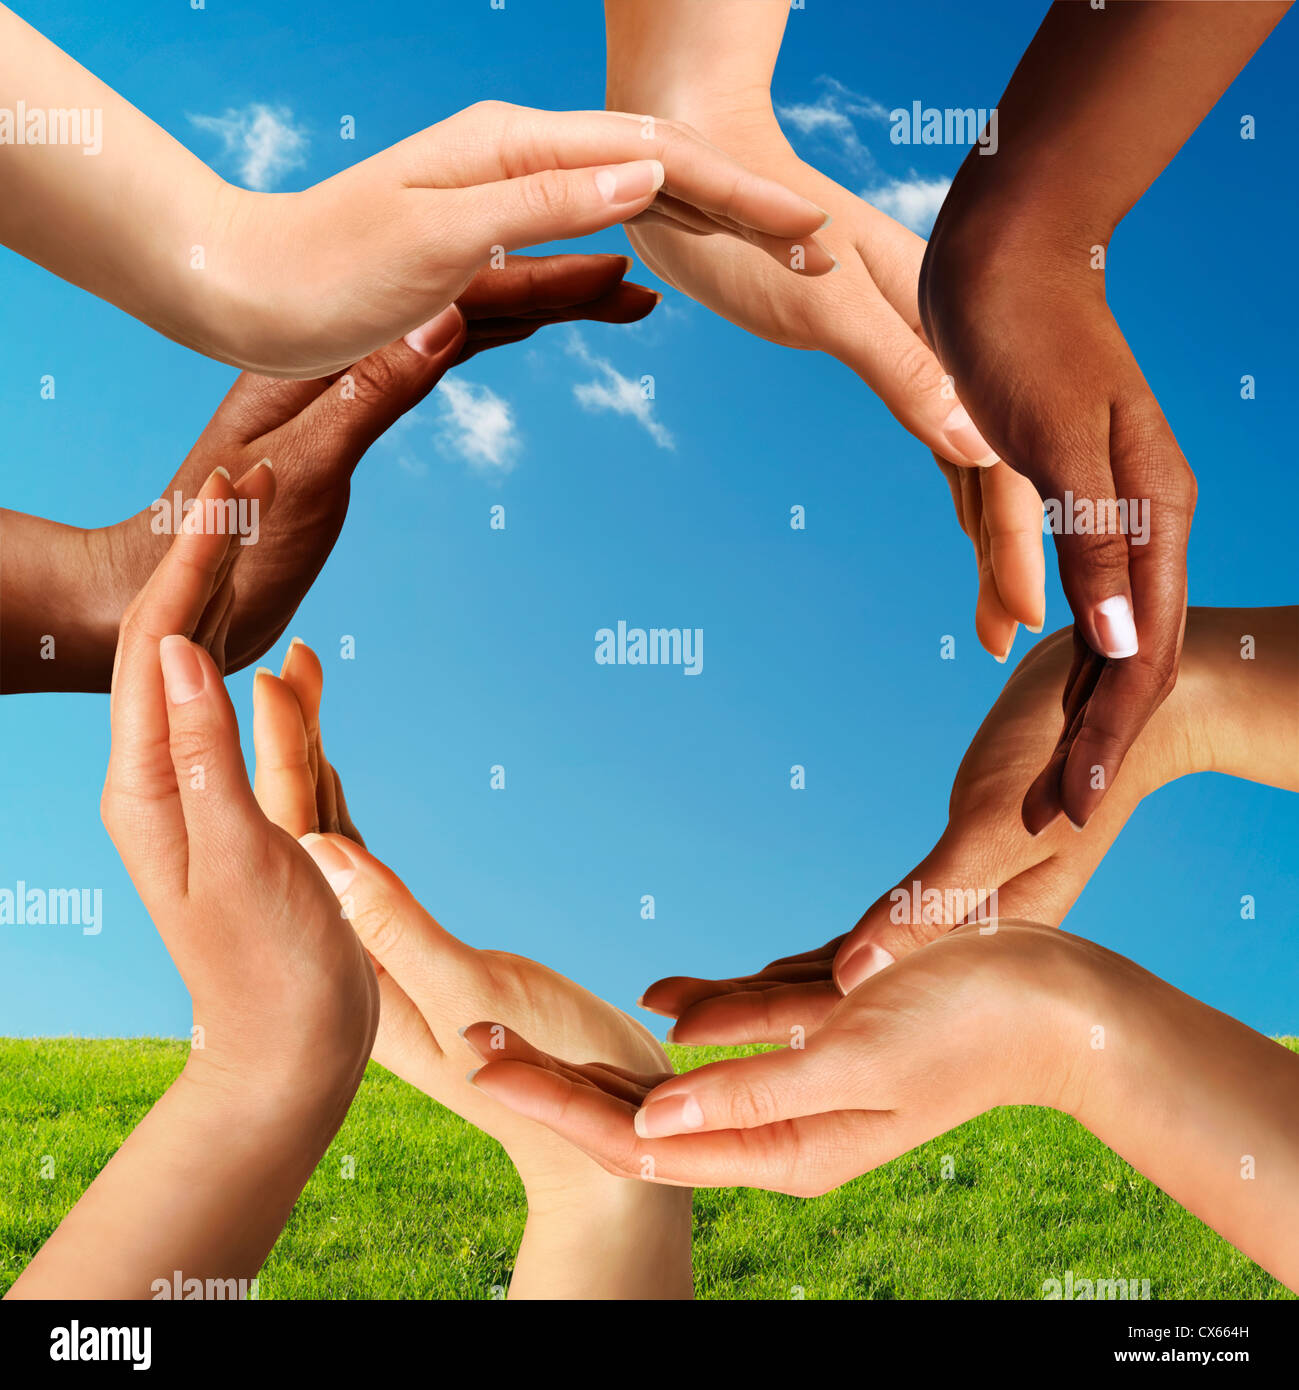 Conceptual peace and cultural diversity symbol of multiracial hands making a circle together on blue sky and green grass Stock Photo